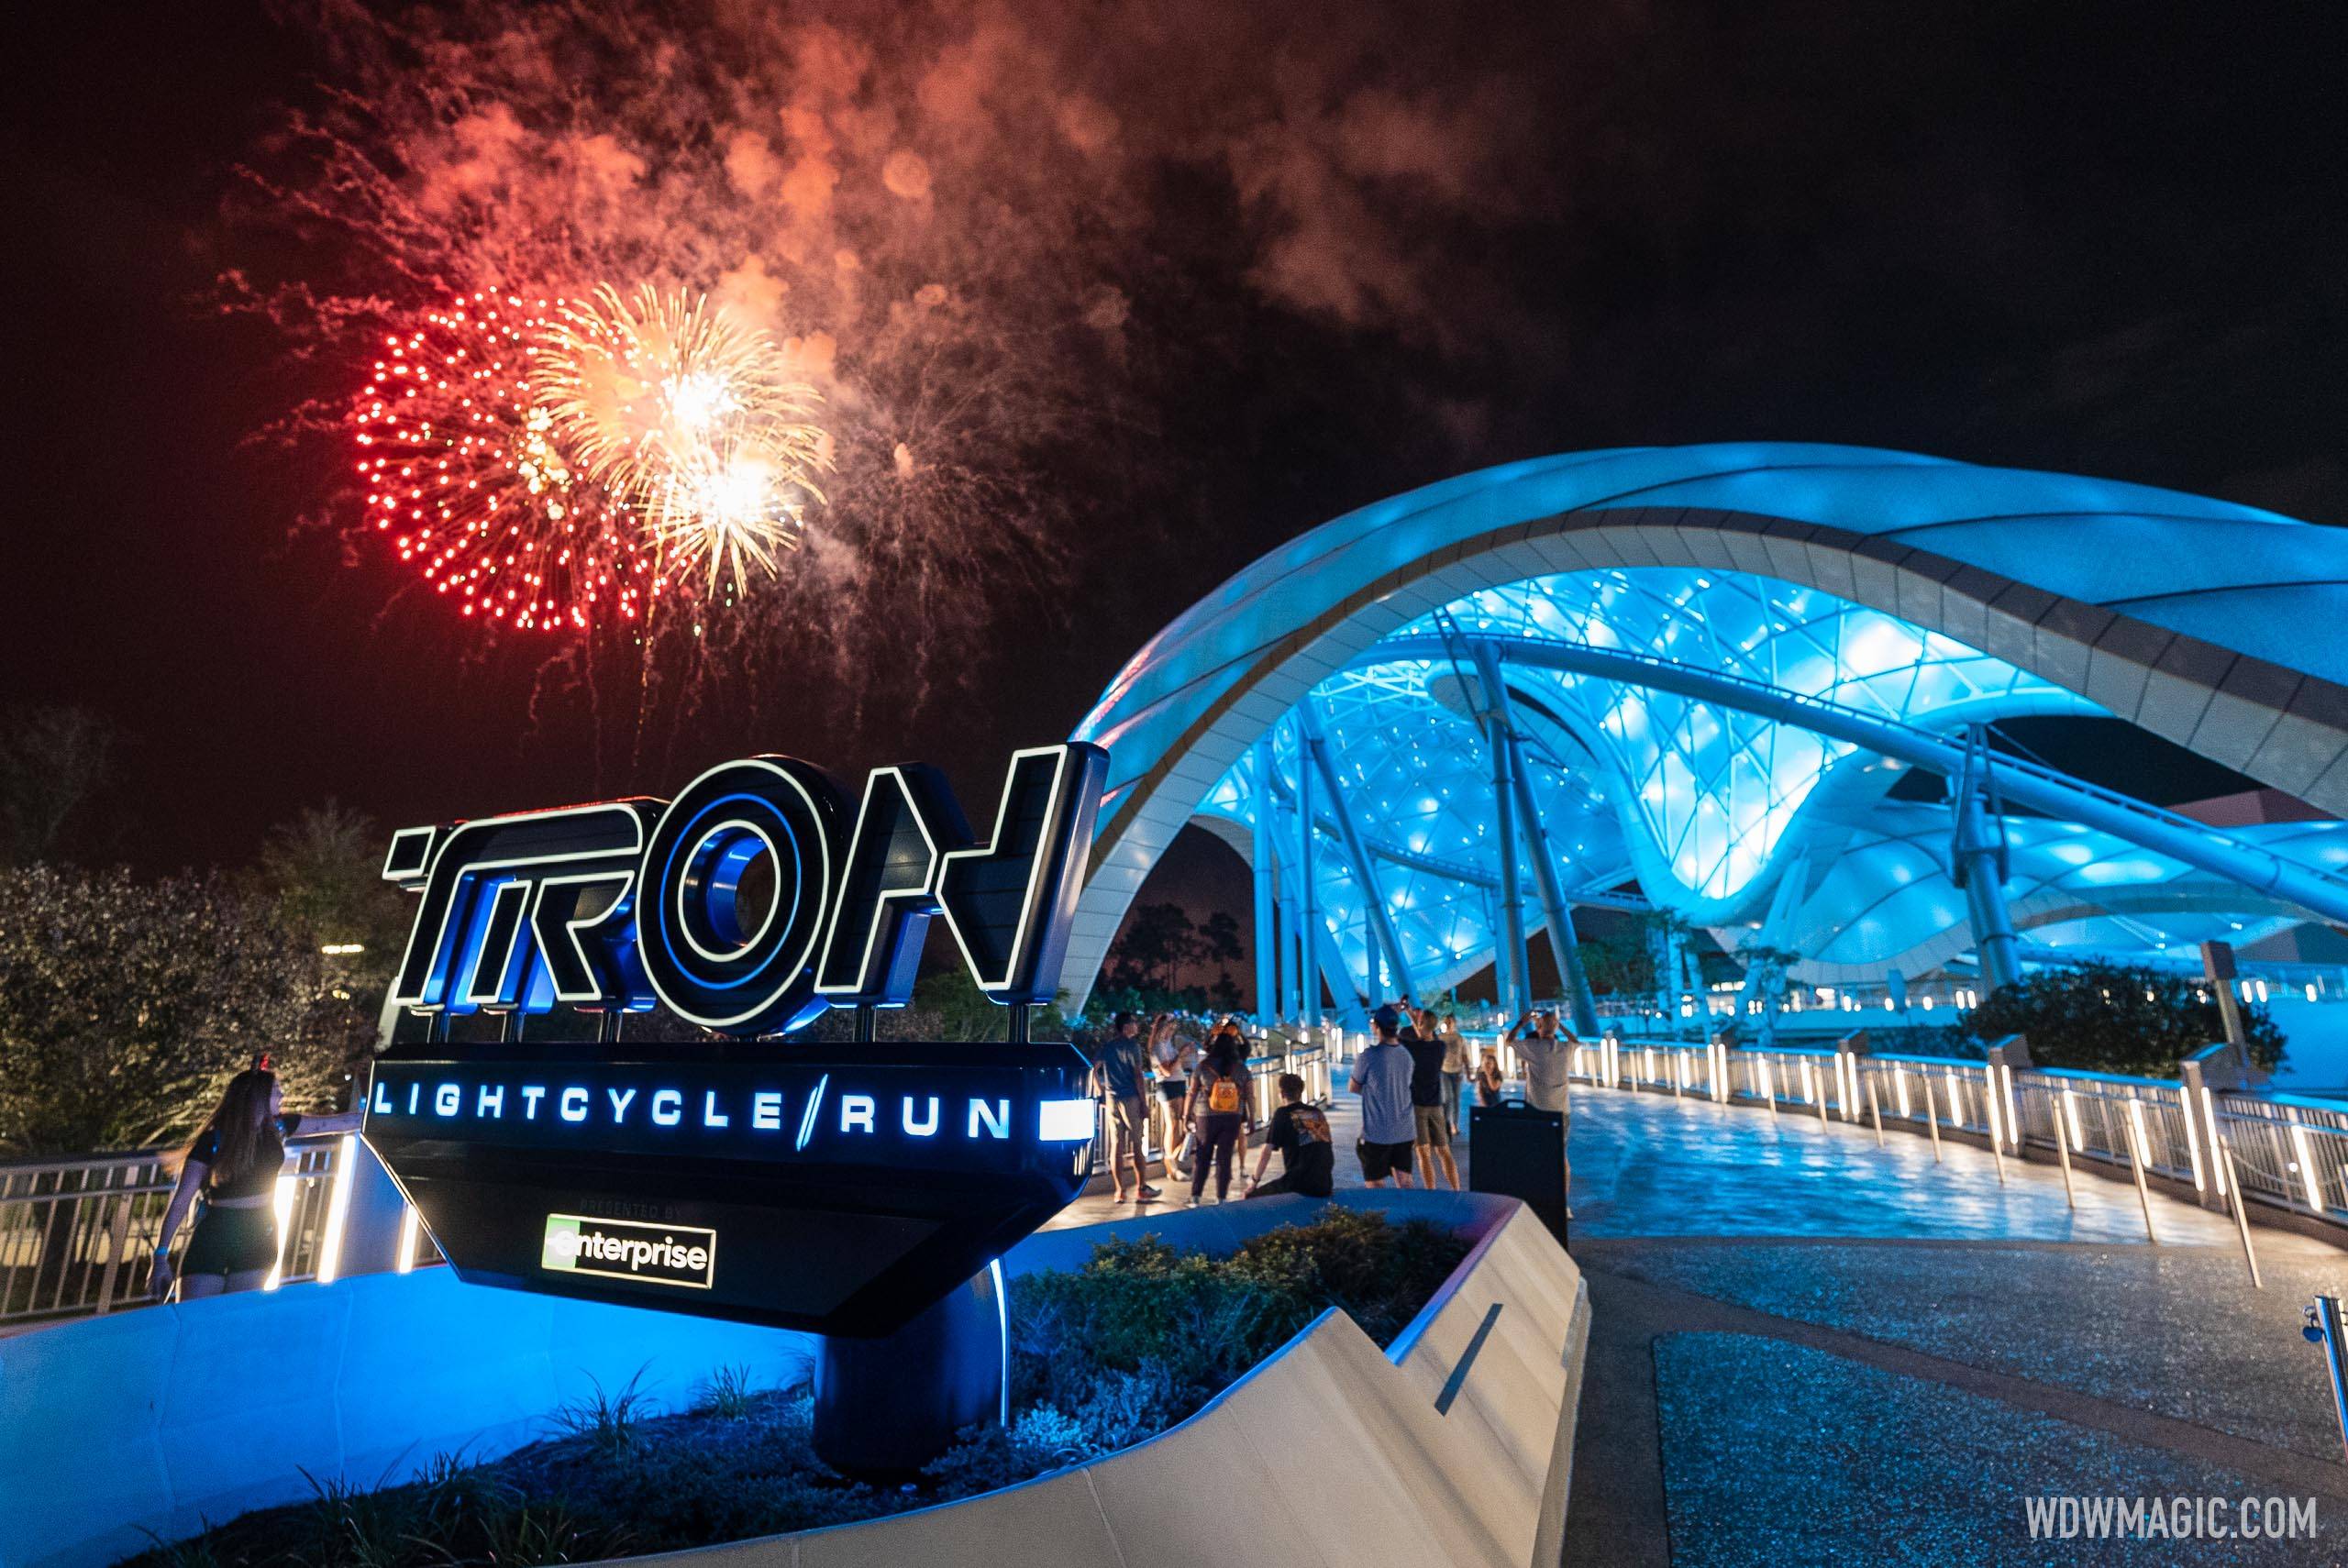 Magic Kingdom will be hosting a media event for TRON Lightcycle Run on March 14